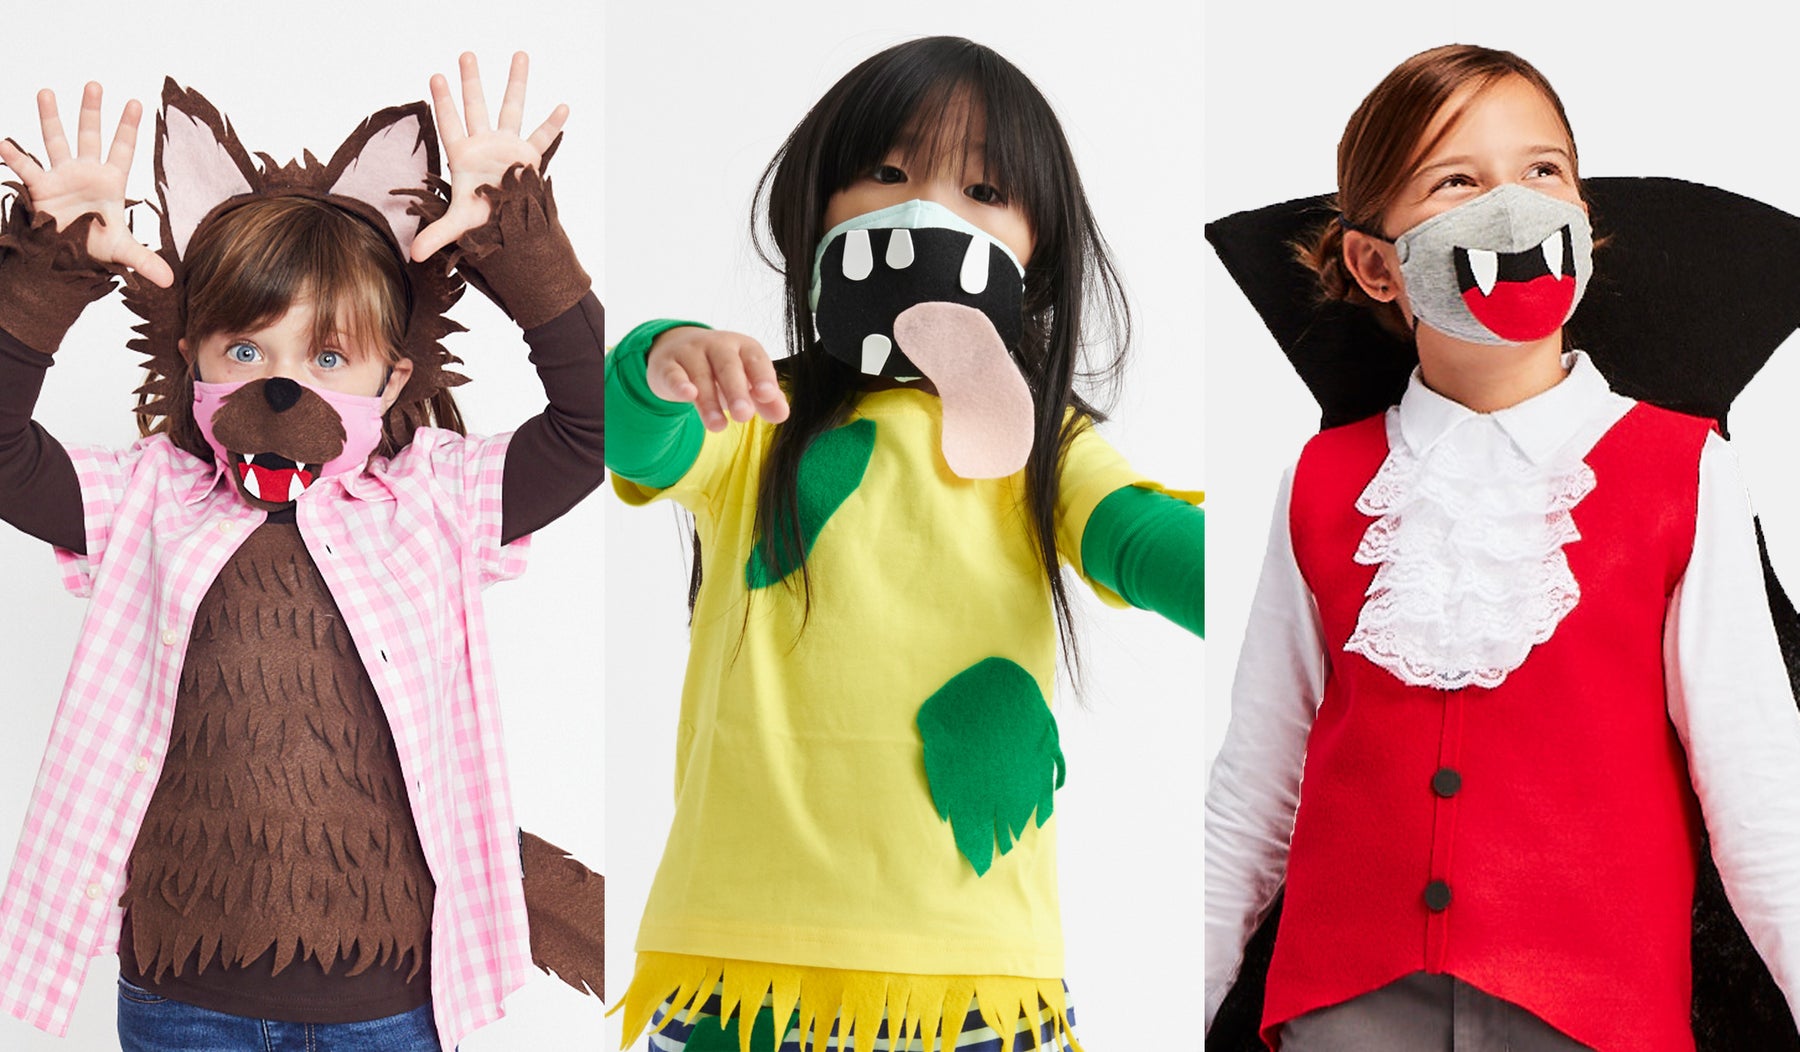 three kids dressed as a werewolf, zombie, and vampire